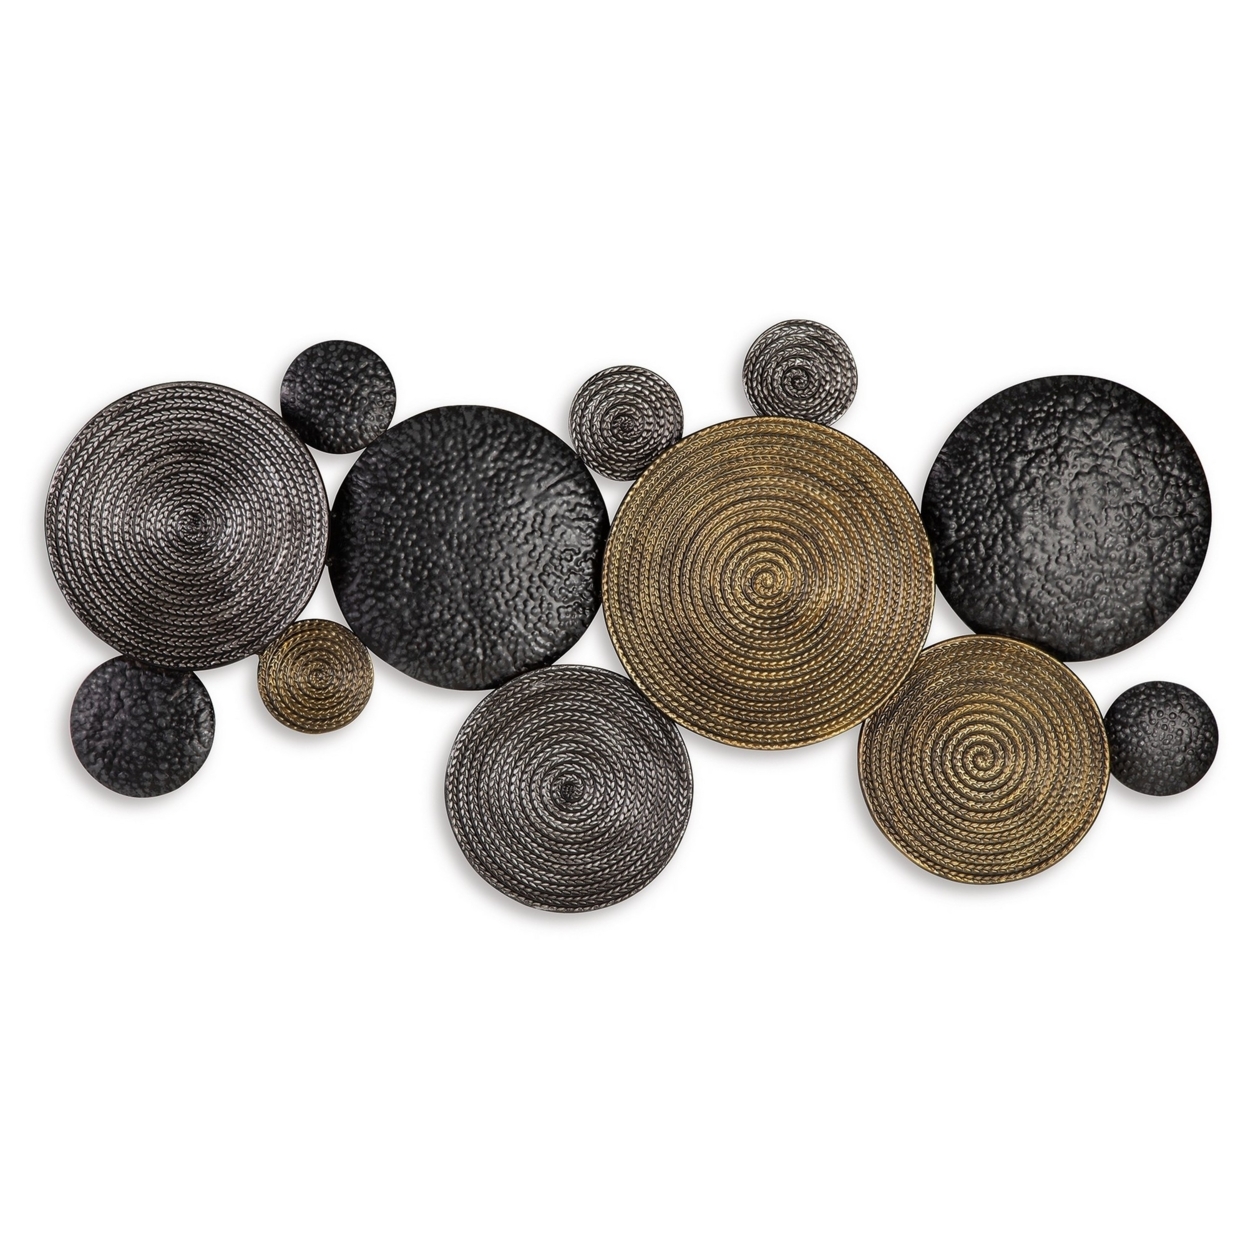 44 Inch Wall Decor, Multiple Circles, Hammered Spiral Texture, Bronze, Black